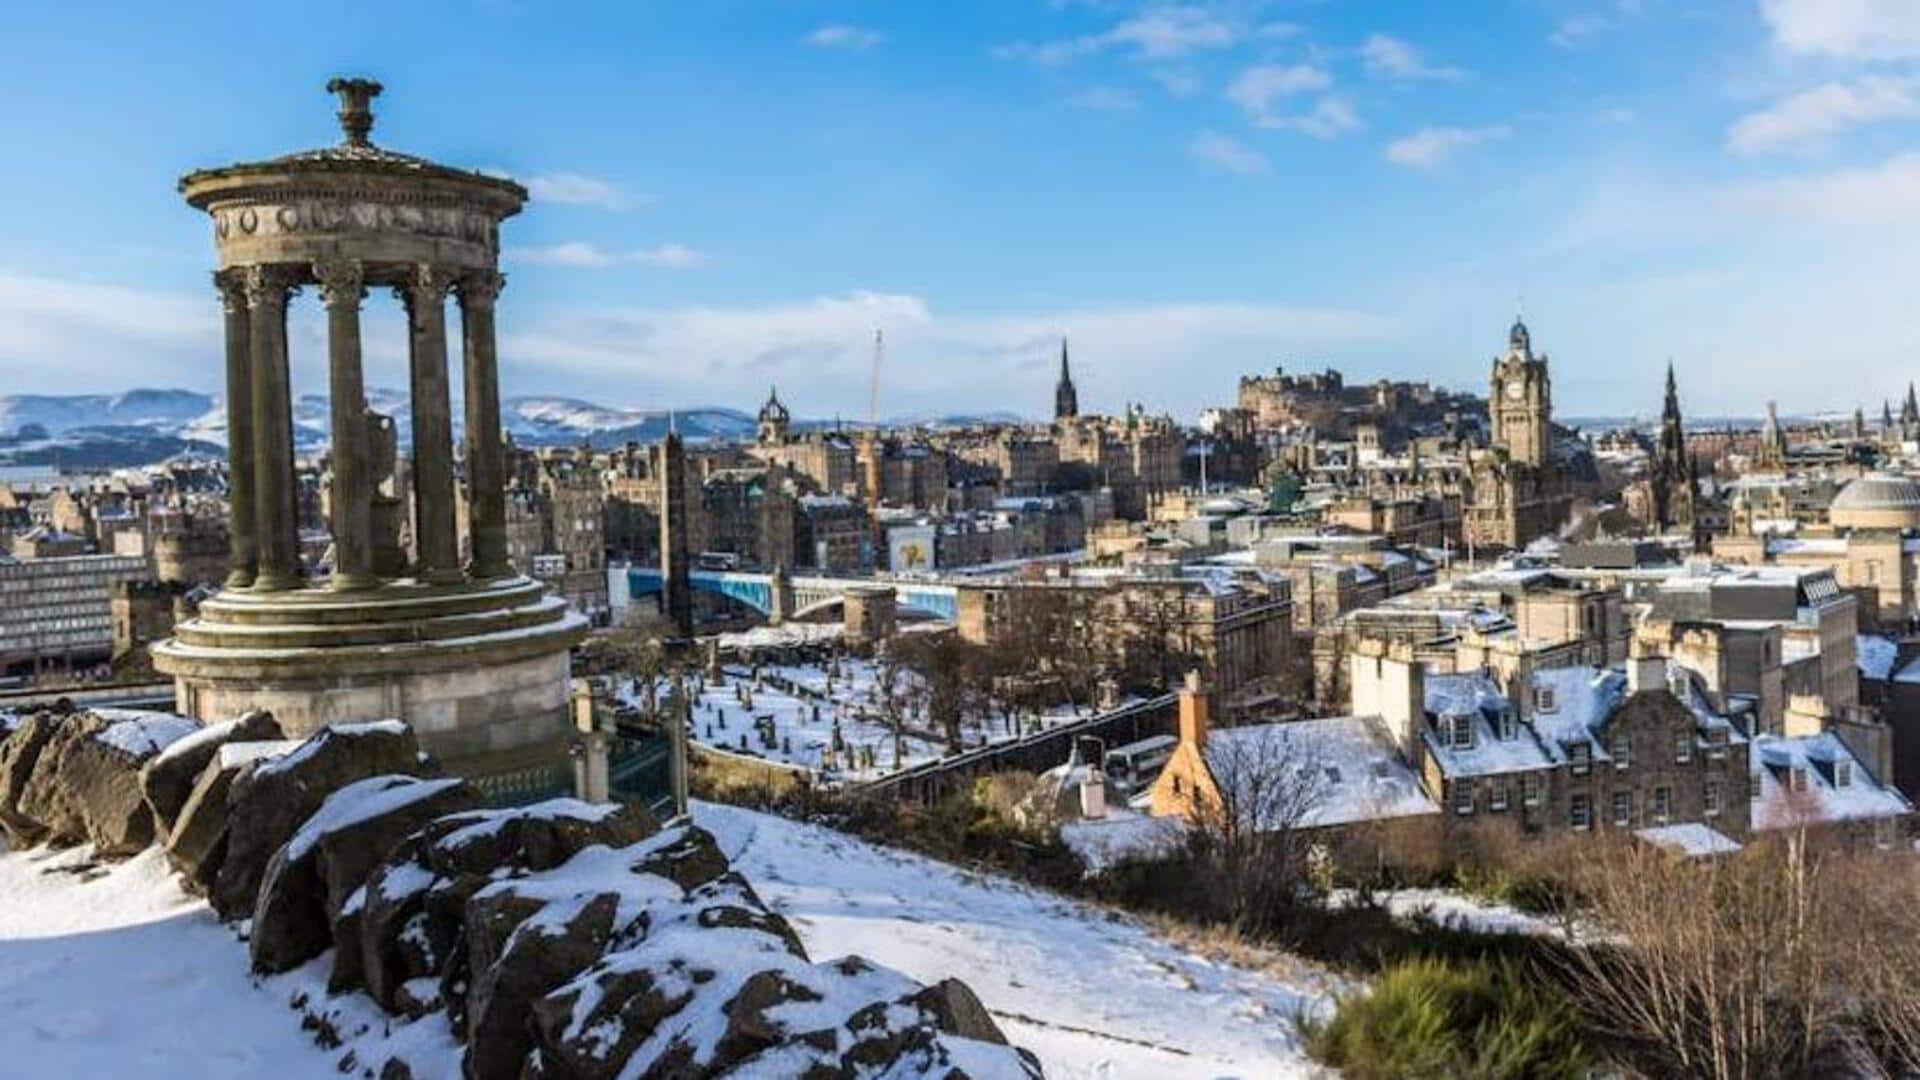 Edinburgh's winter attractions are truly unmissable